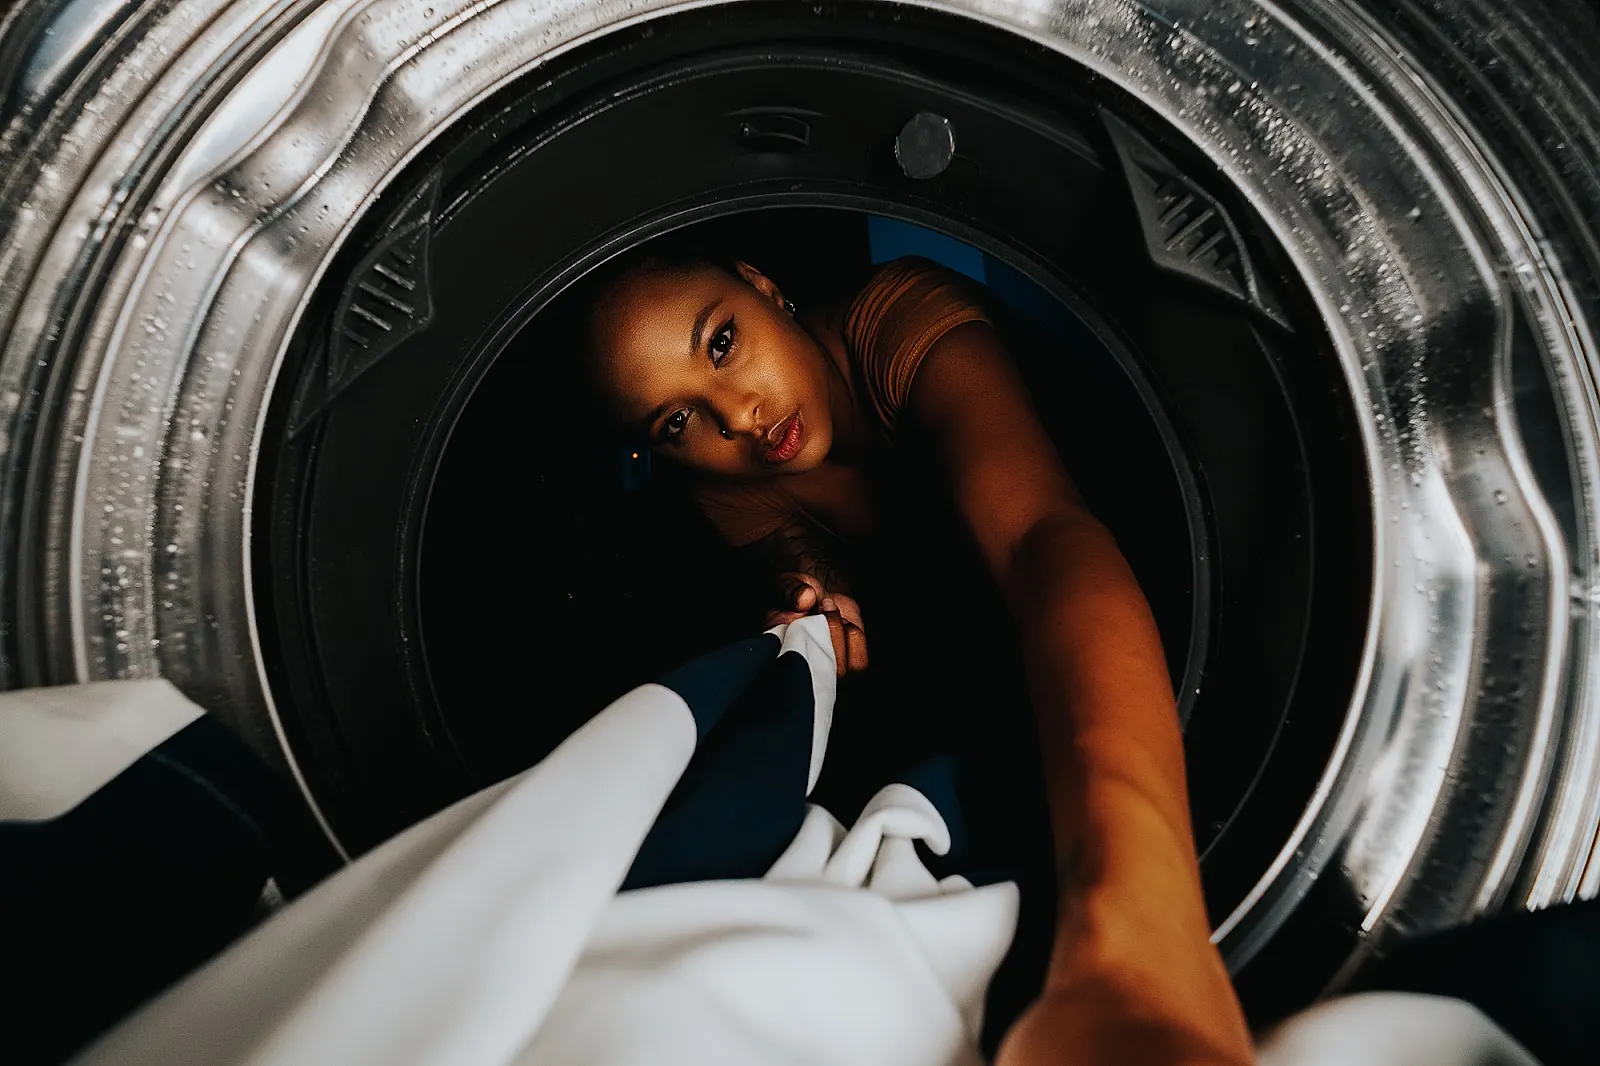 Self portrait of Chinelle Rojas taken with a Fujifilm XT-4. The camera is inside a dryer machine and facing her as she reaches in.